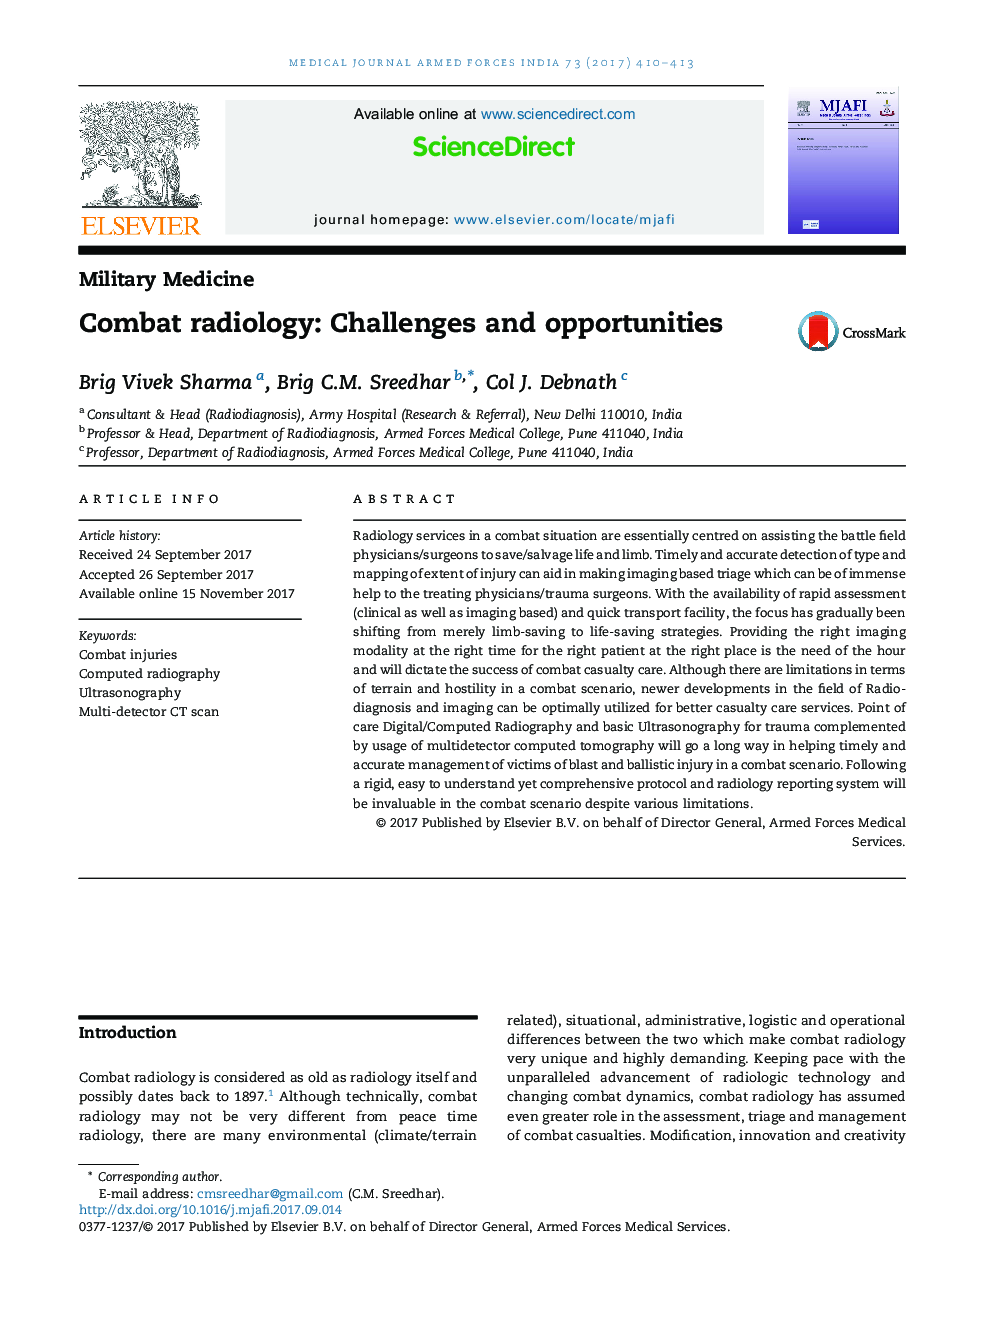 Combat radiology: Challenges and opportunities